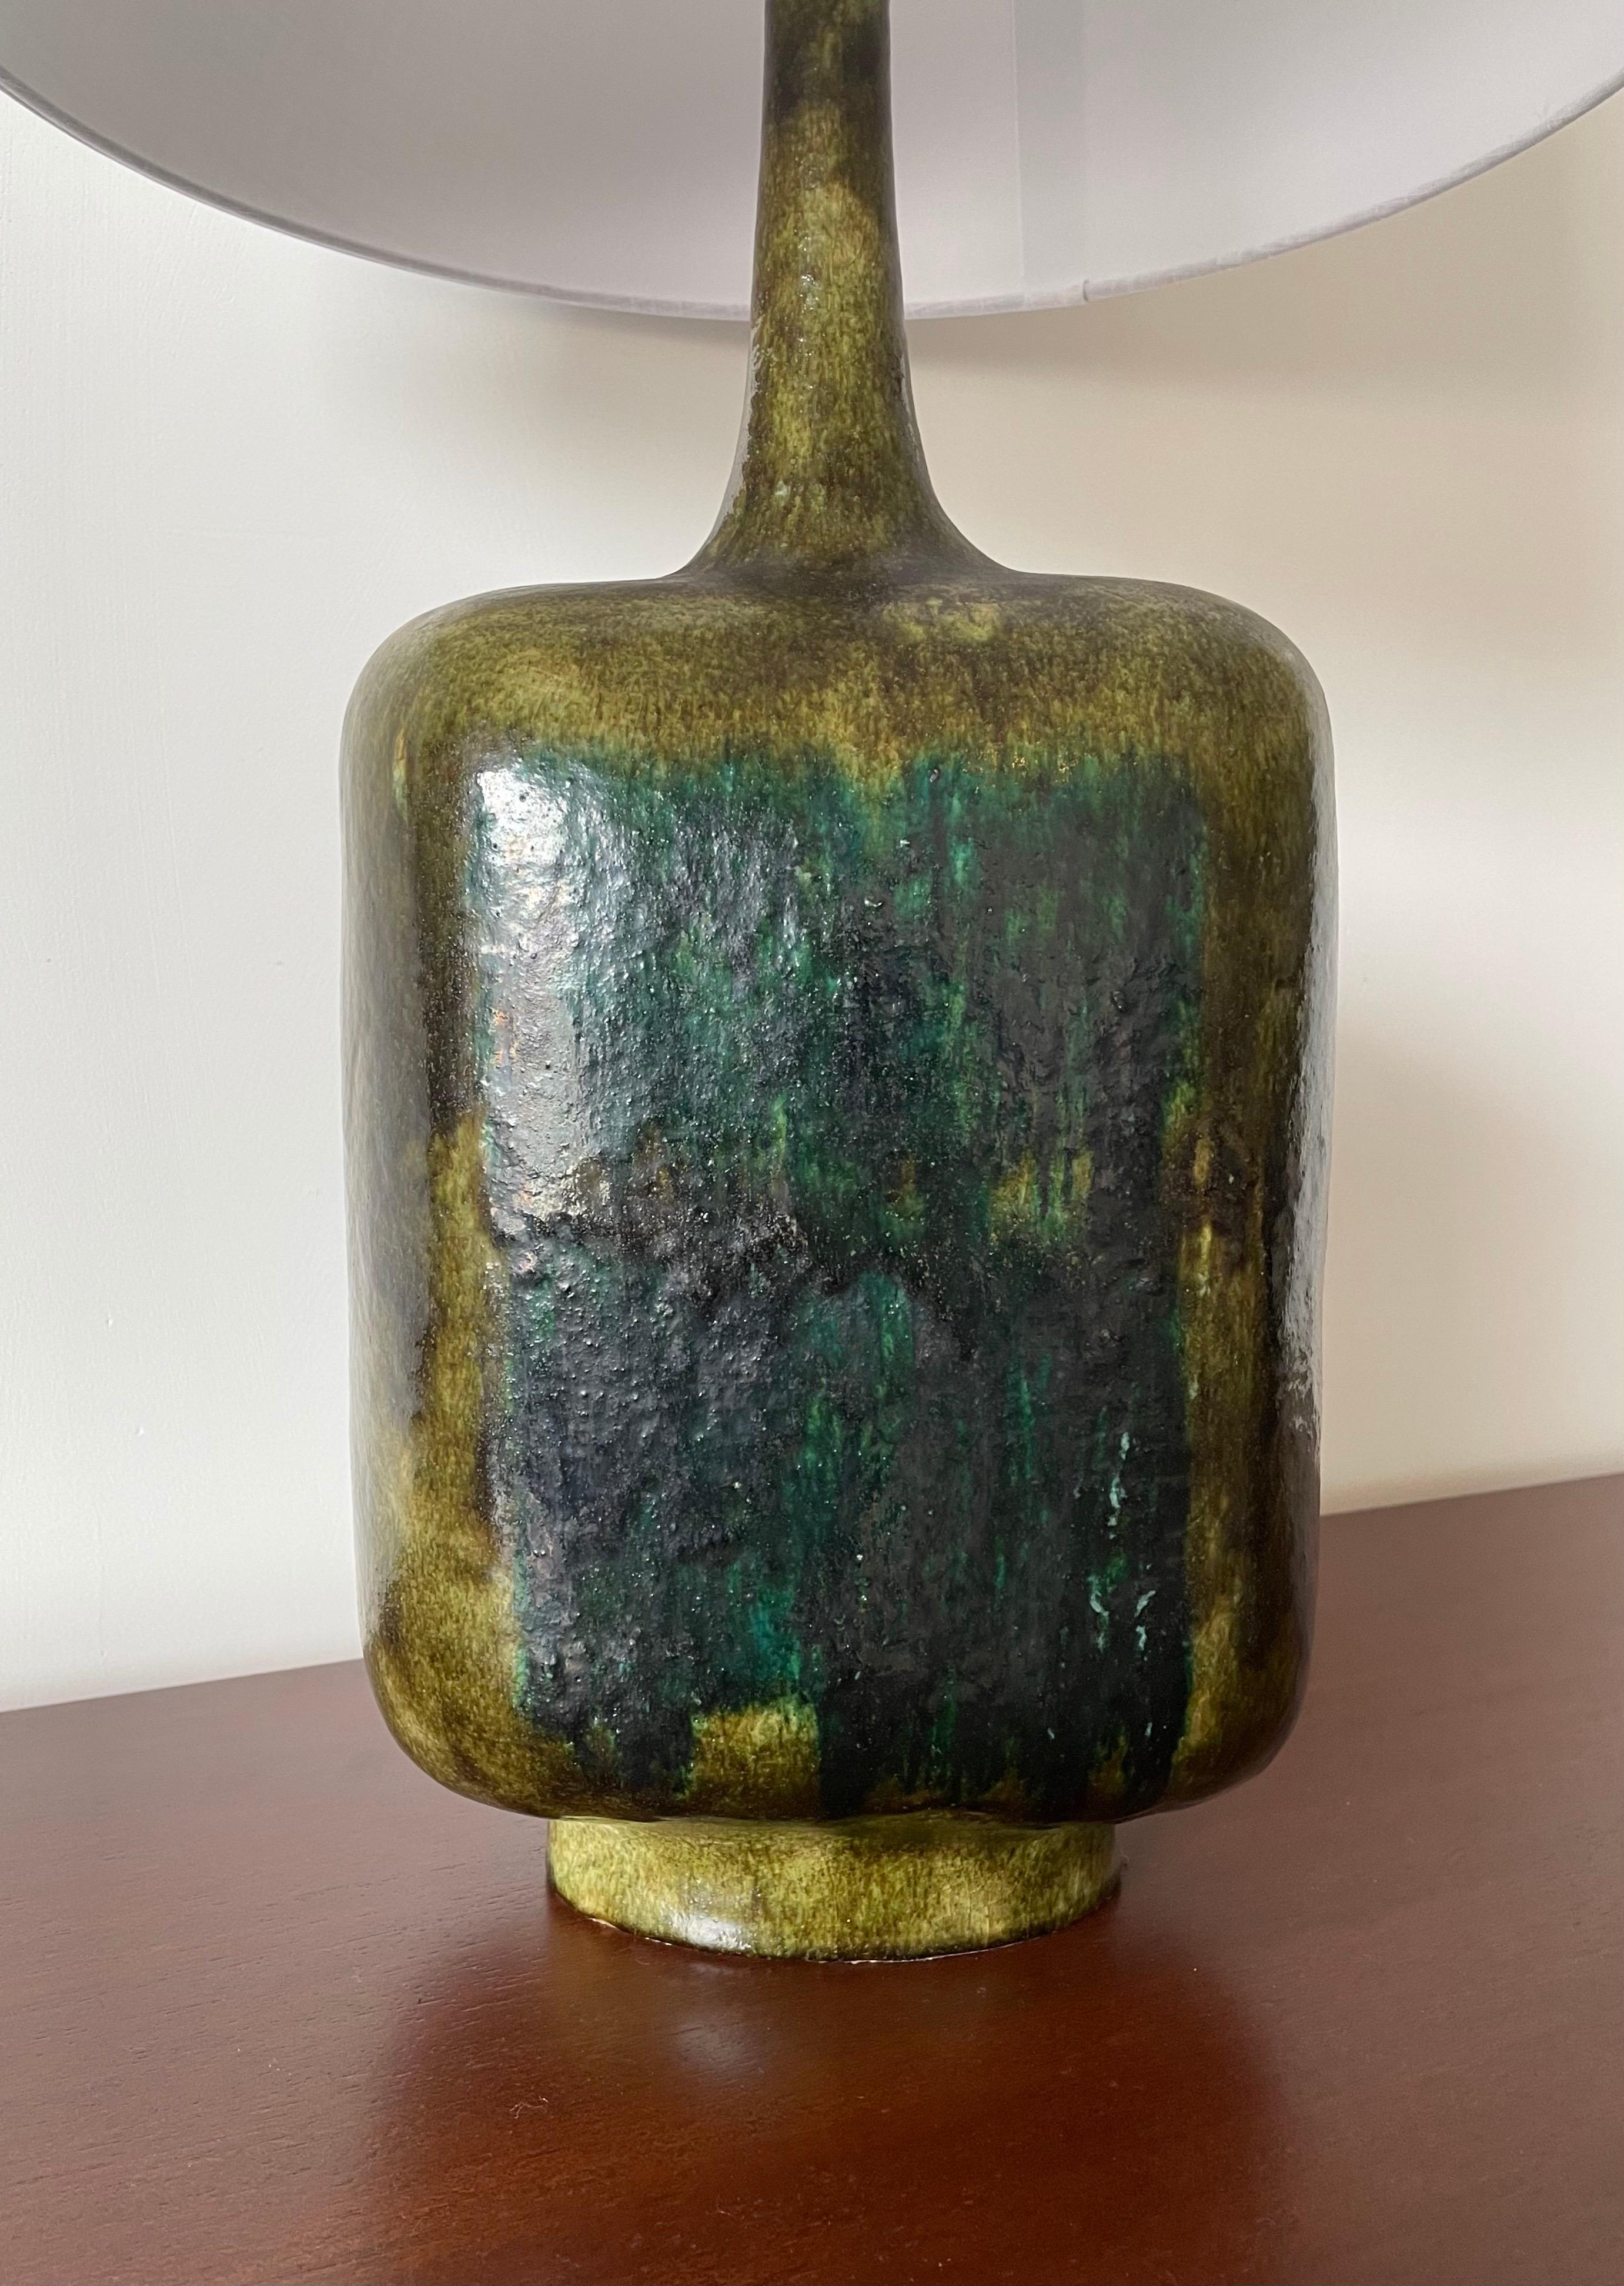 Large table lamp by Guido Gambone. Unusual colors in comparison to much of his work.

Overall:
30” tall
17” wide shade 

Ceramic:
18.5” ceramic 
9.25” wide
6.5” deep.